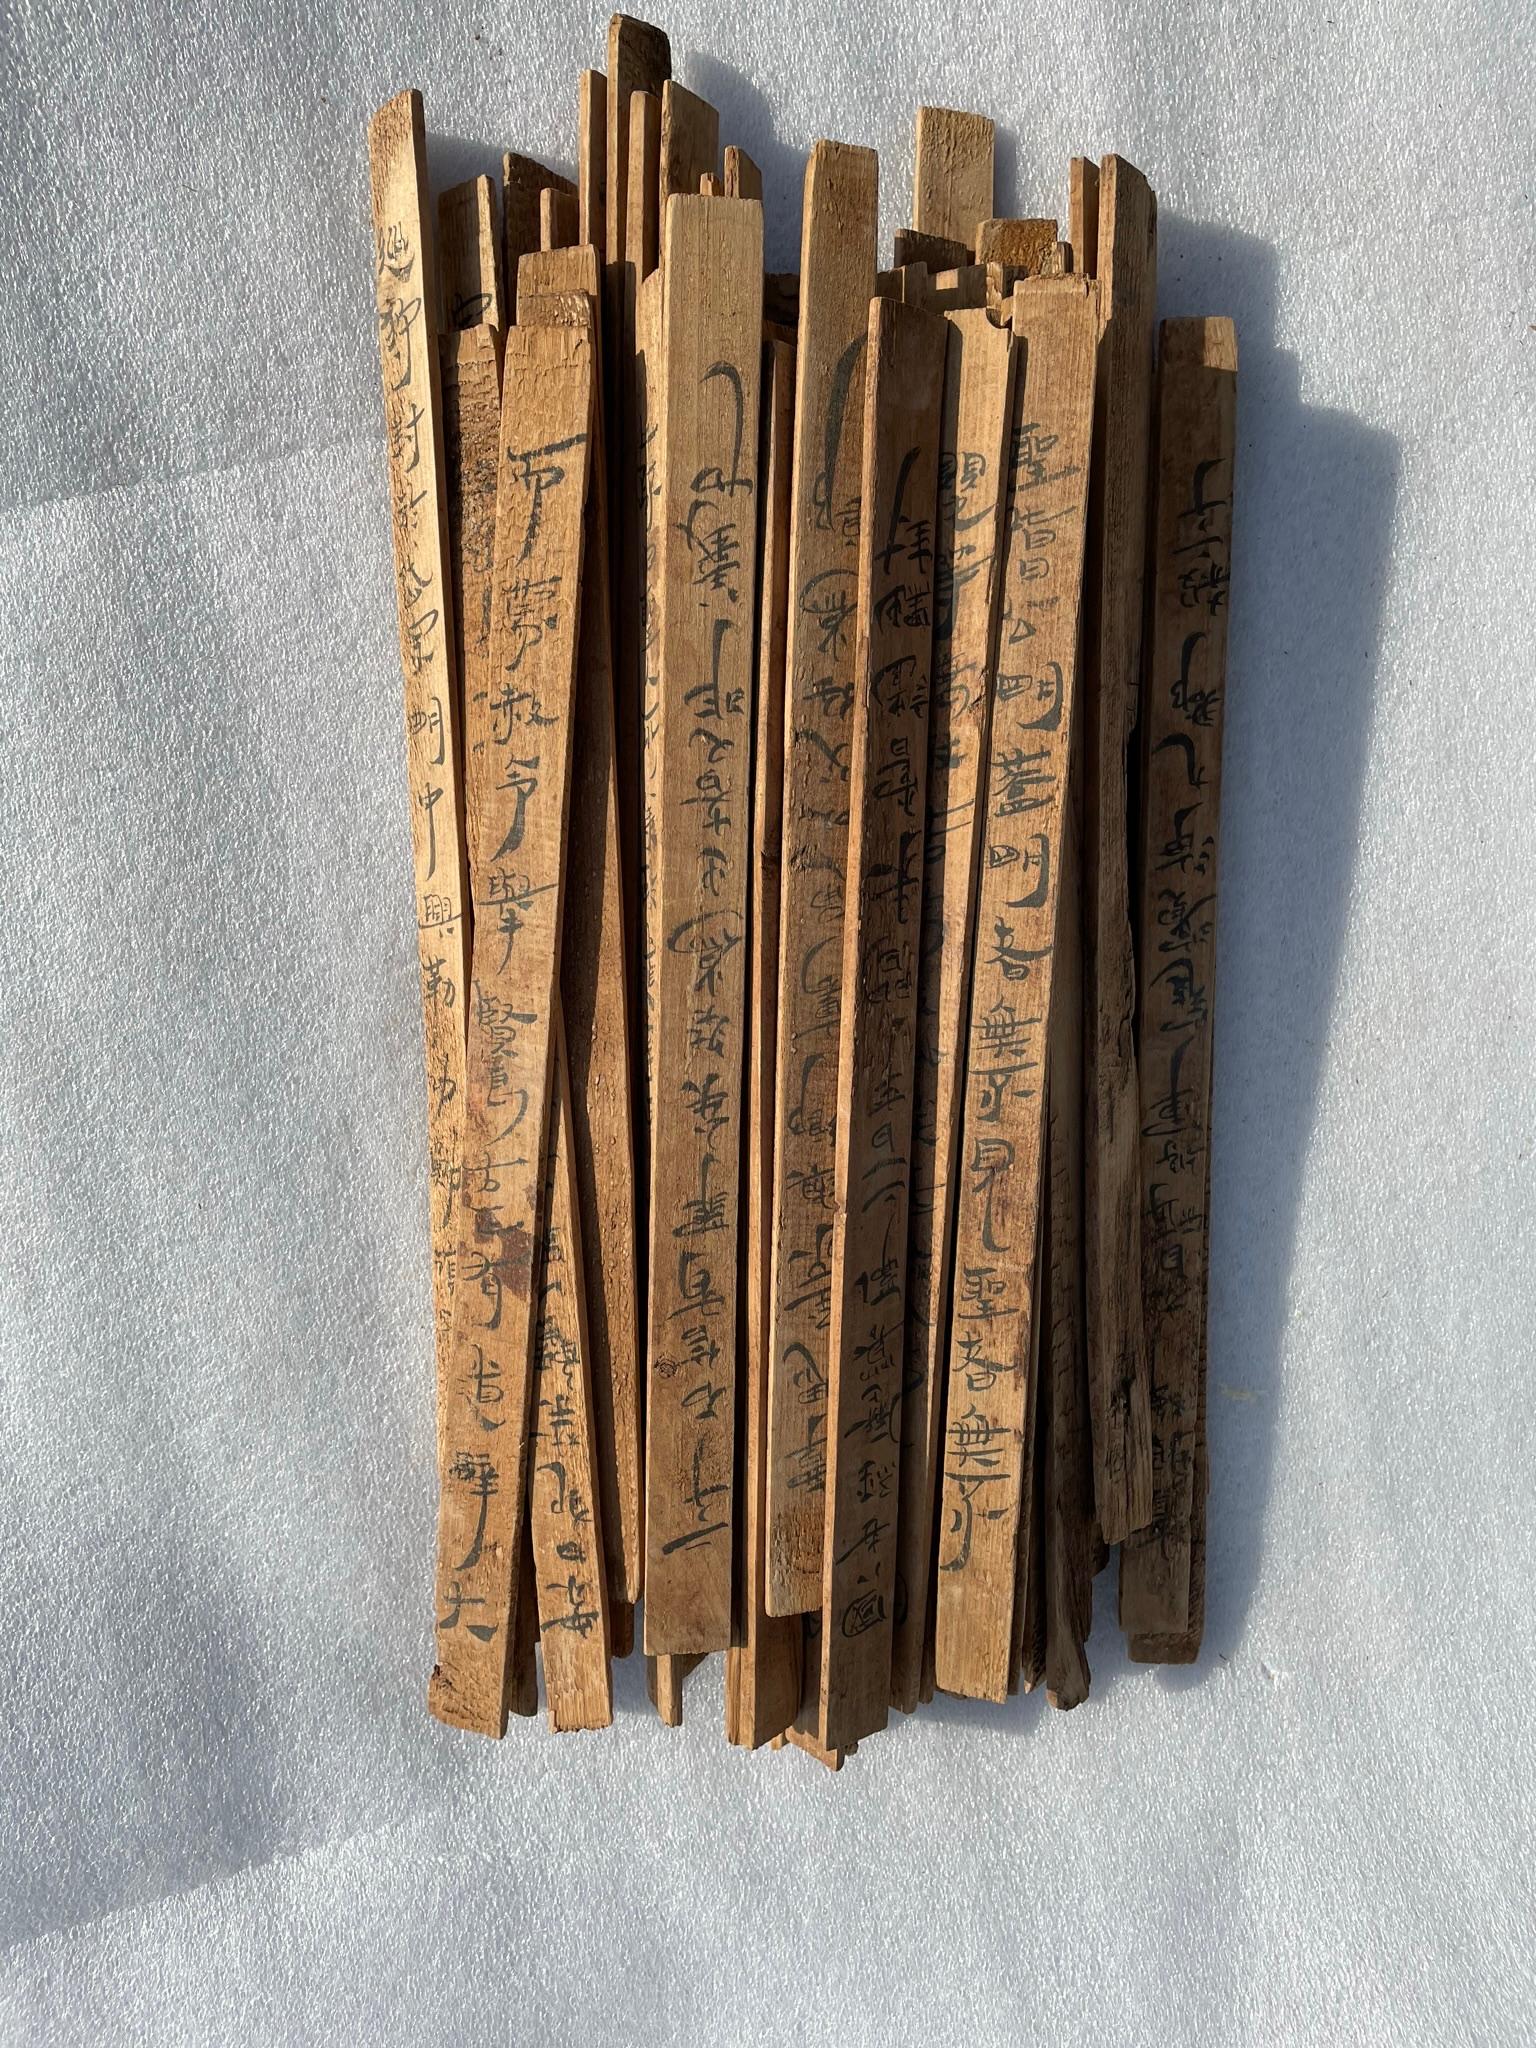 Chinese Old Bamboo Slips with Calligraphy Jiandu, 59 Piece Collection For Sale 12